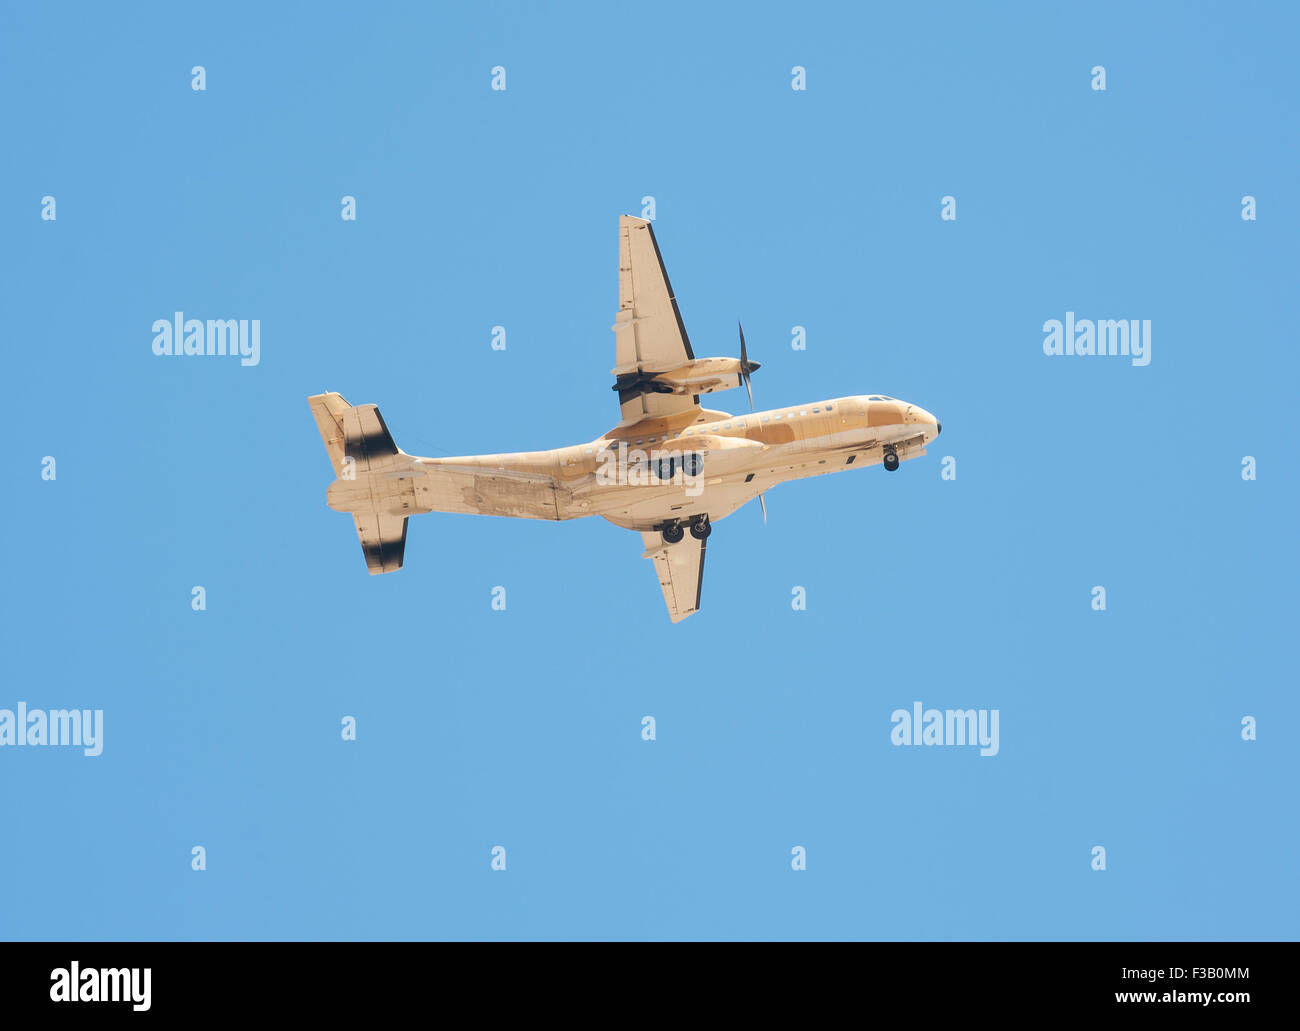 Large military tactical transport aircraft turboprop aeroplane in flight against blue sky background Stock Photo